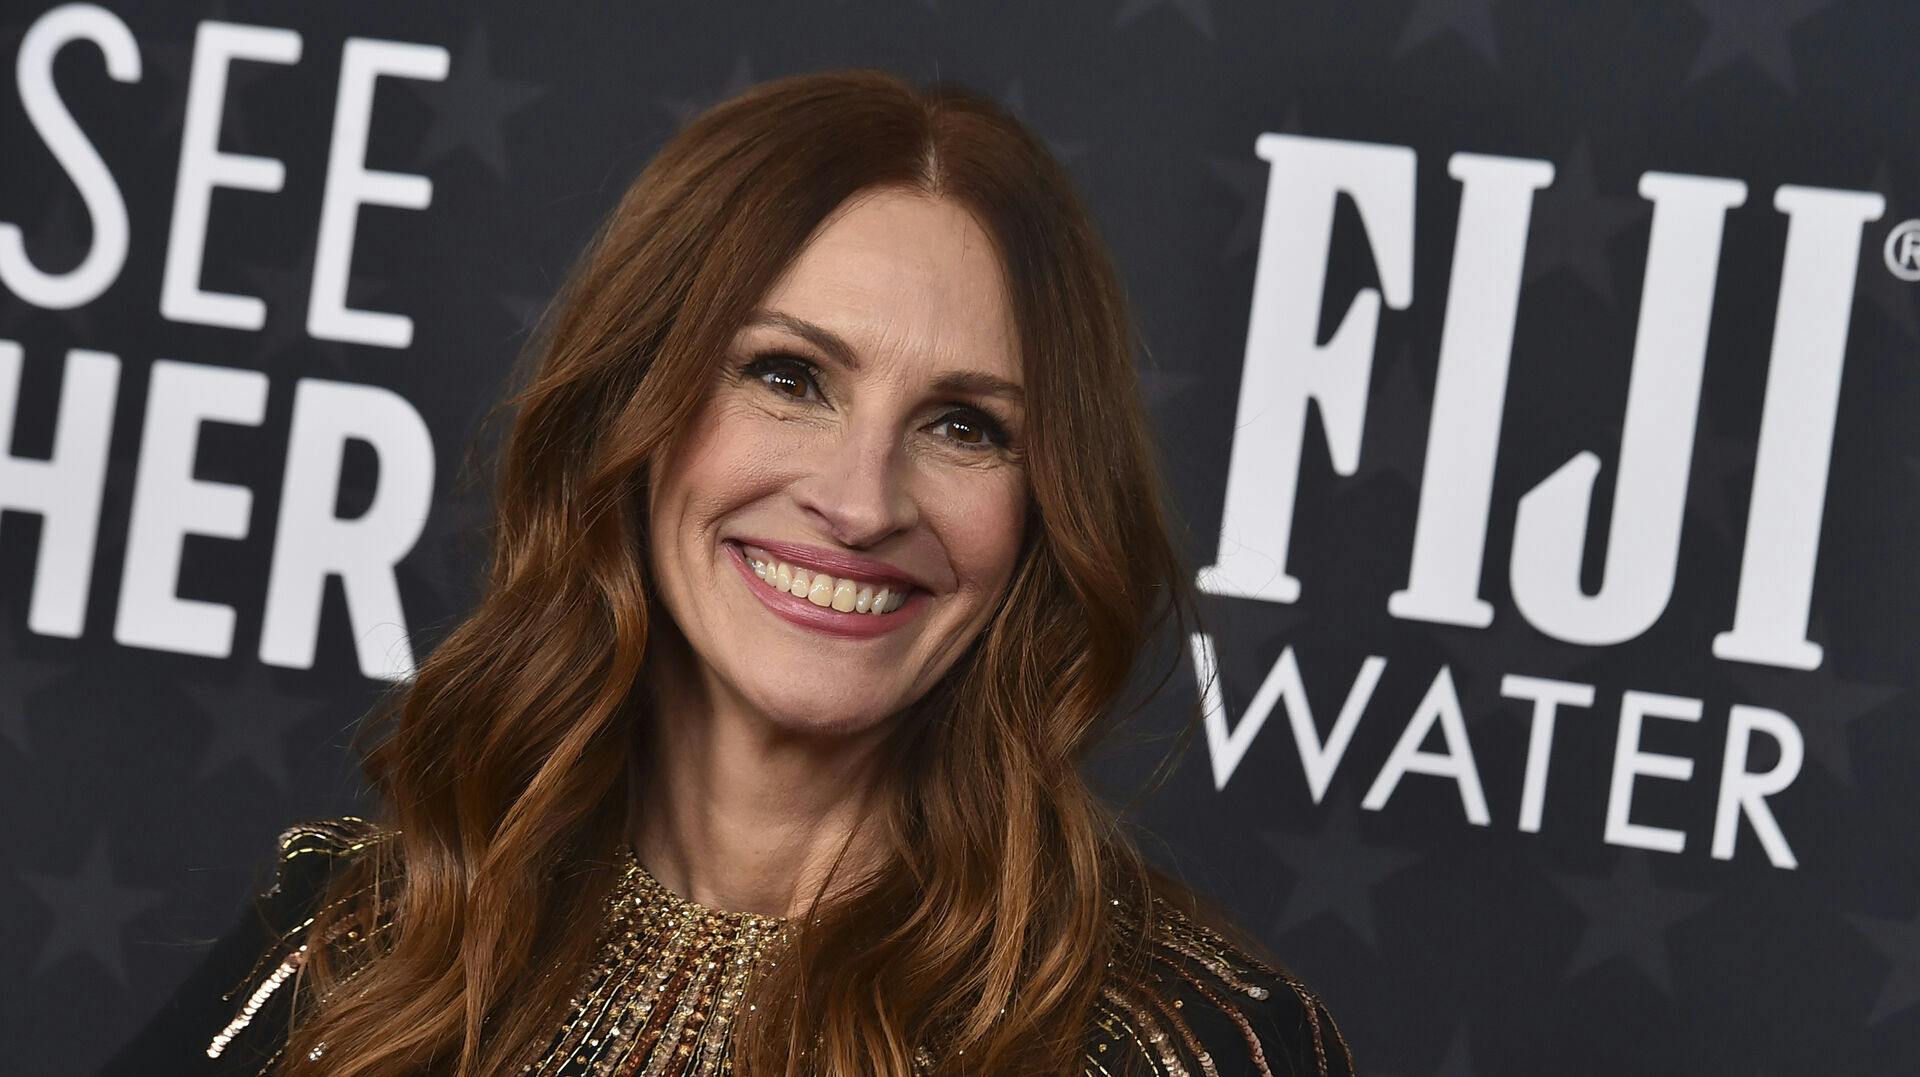 Julia Roberts arrives at the 28th annual Critics Choice Awards at The Fairmont Century Plaza Hotel on Sunday, Jan. 15, 2023, in Los Angeles. (Photo by Jordan Strauss/Invision/AP)